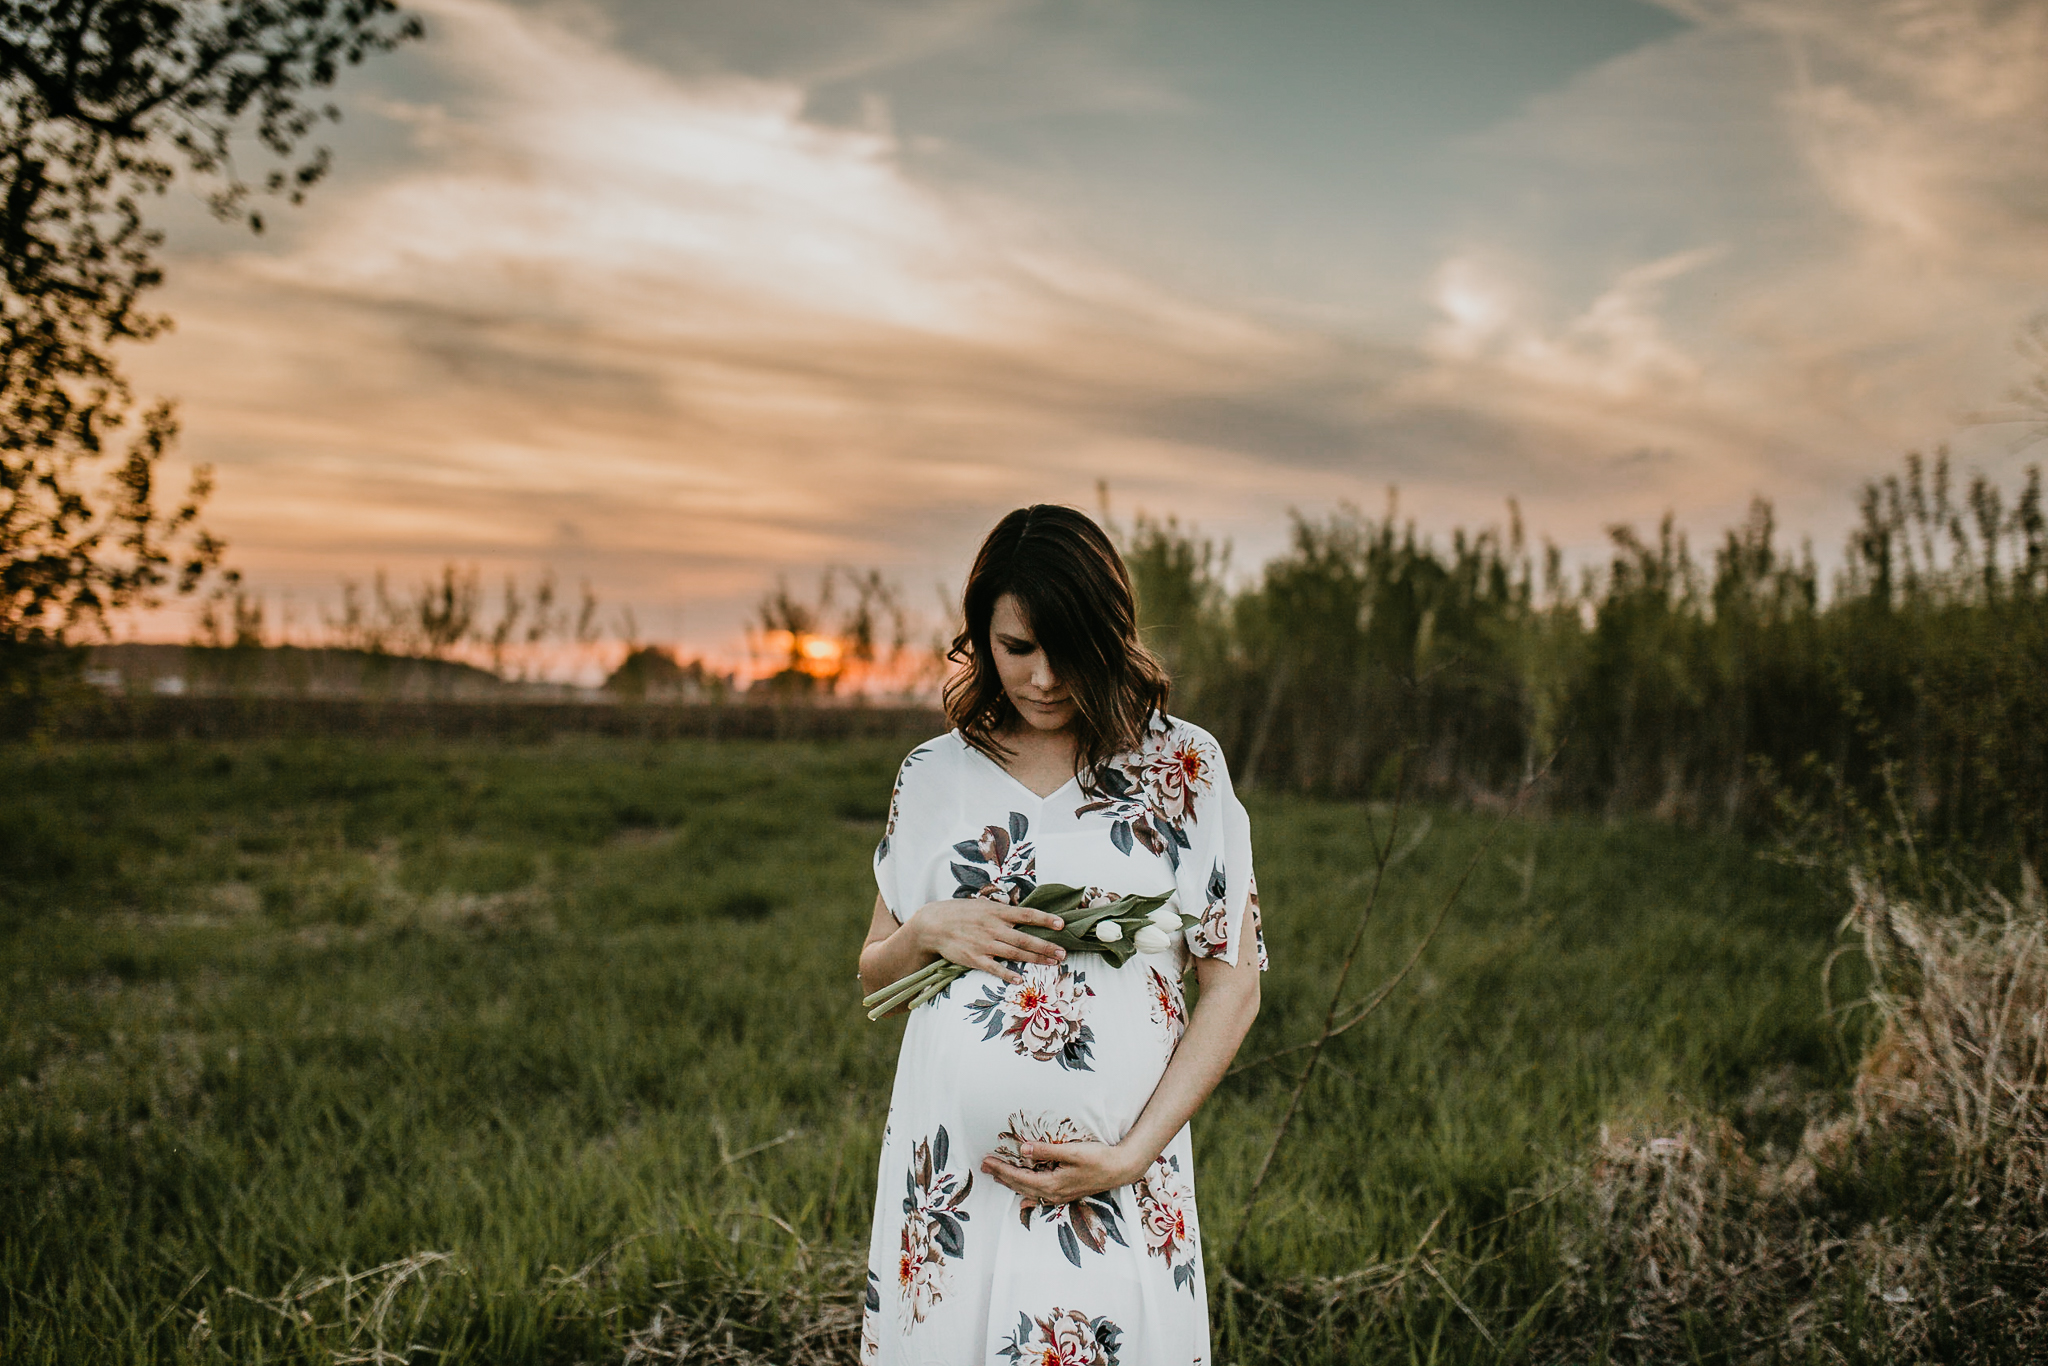 Pregnant mother in a field at golden hour looking down at her belly lovingly.